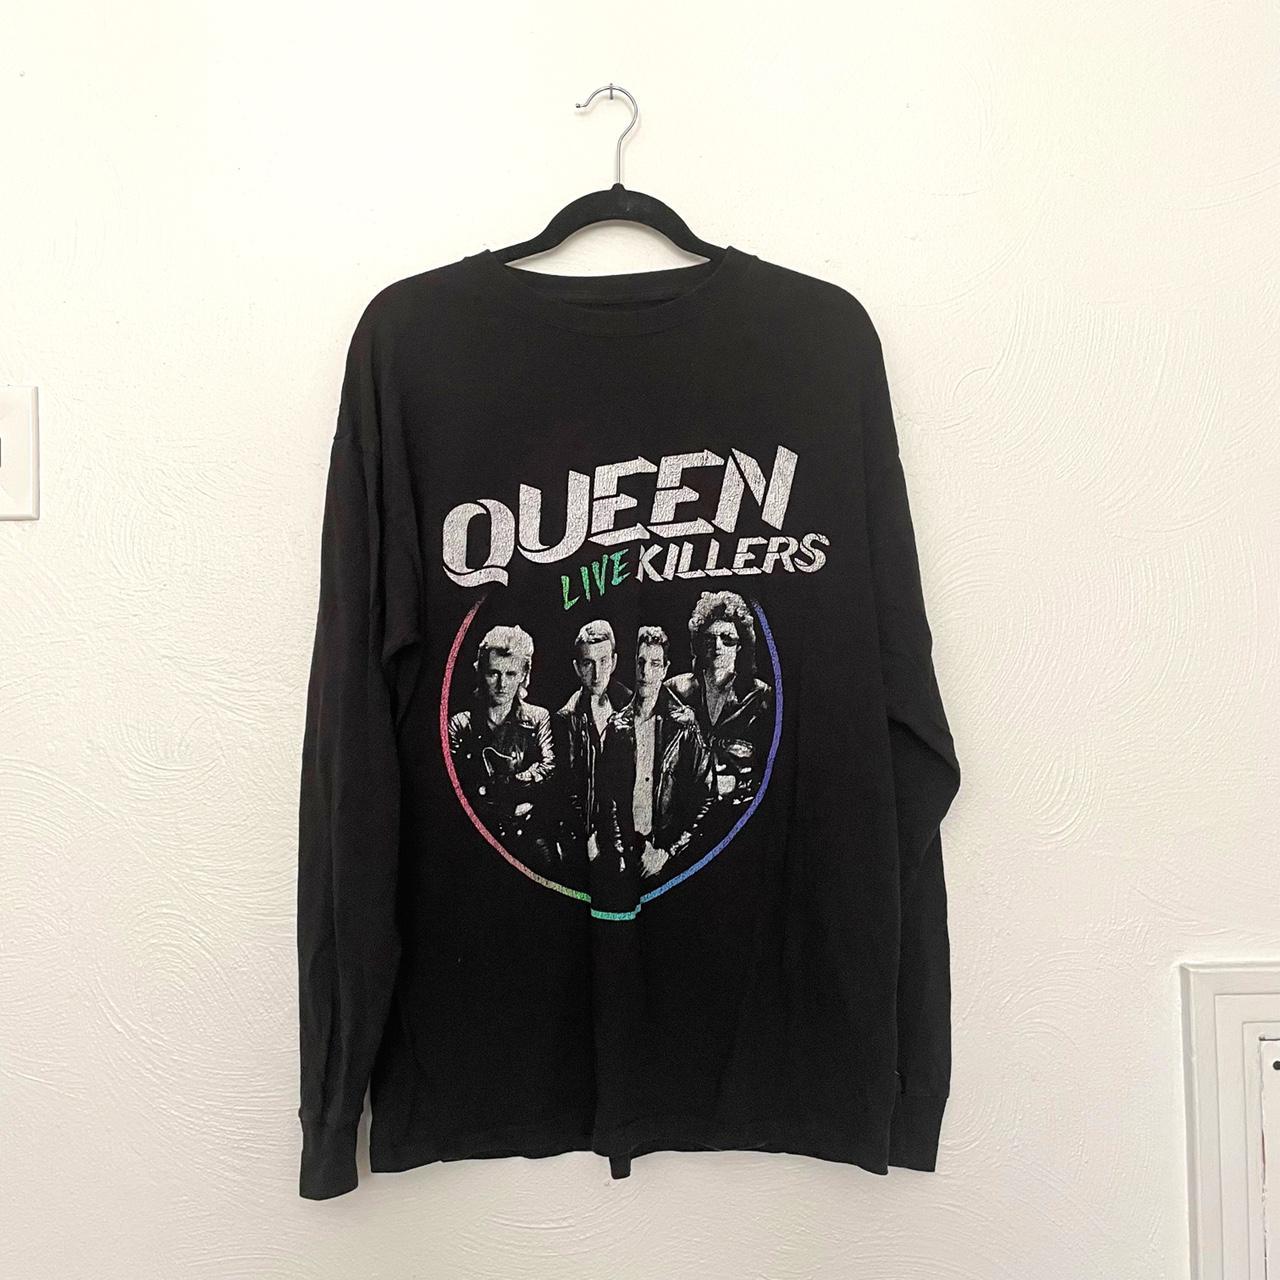 Product Image 2 - Queen graphic tee!

sized as a